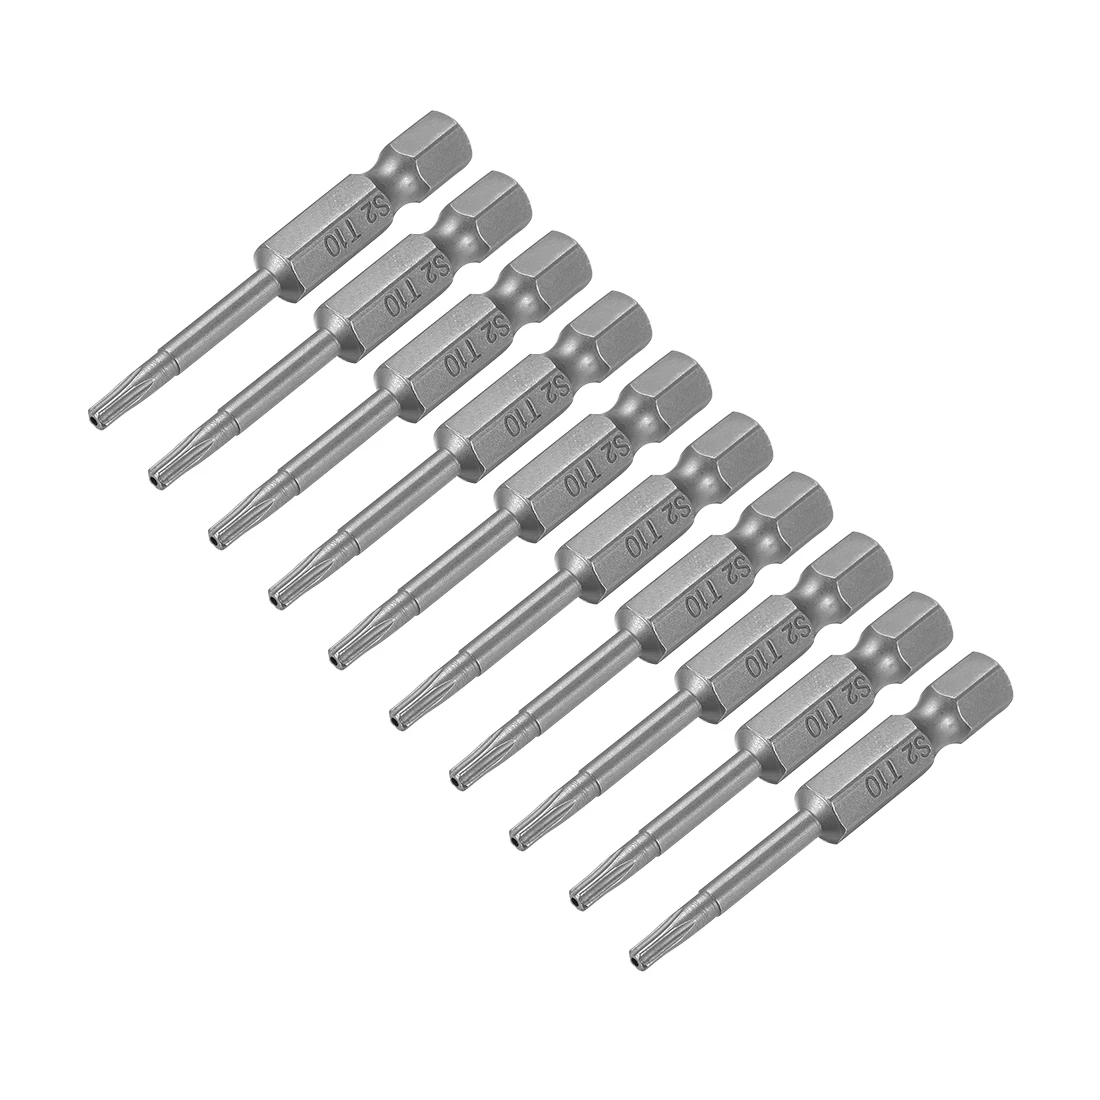 

uxcell 50mm Long 1/4inch Hex Shank T10 Torx Security Star Screwdriver Bits S2 High Alloy Steel 10pcs